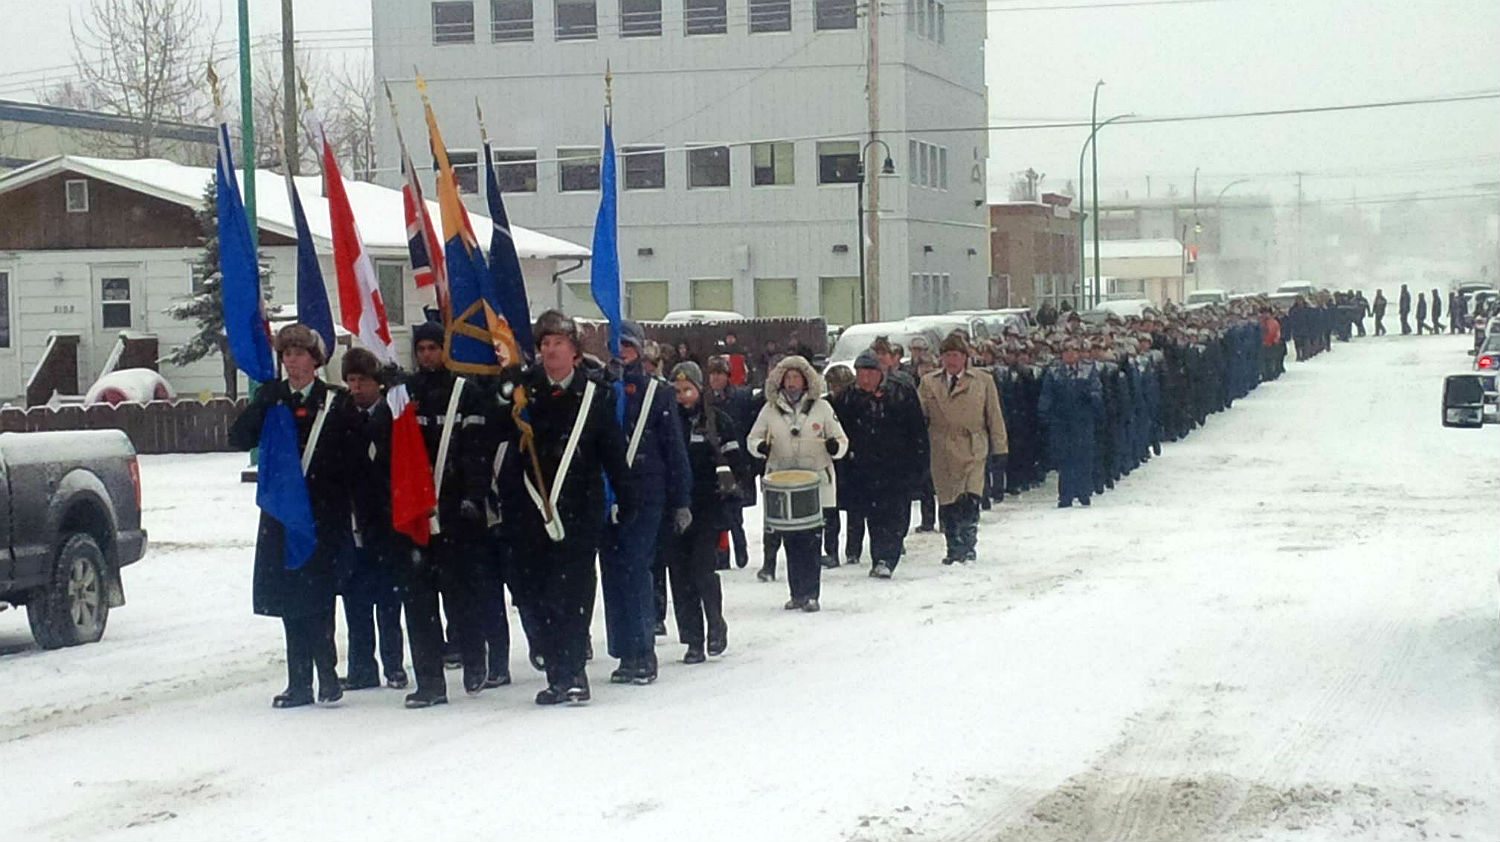 The Legion and honouring Remembrance Day